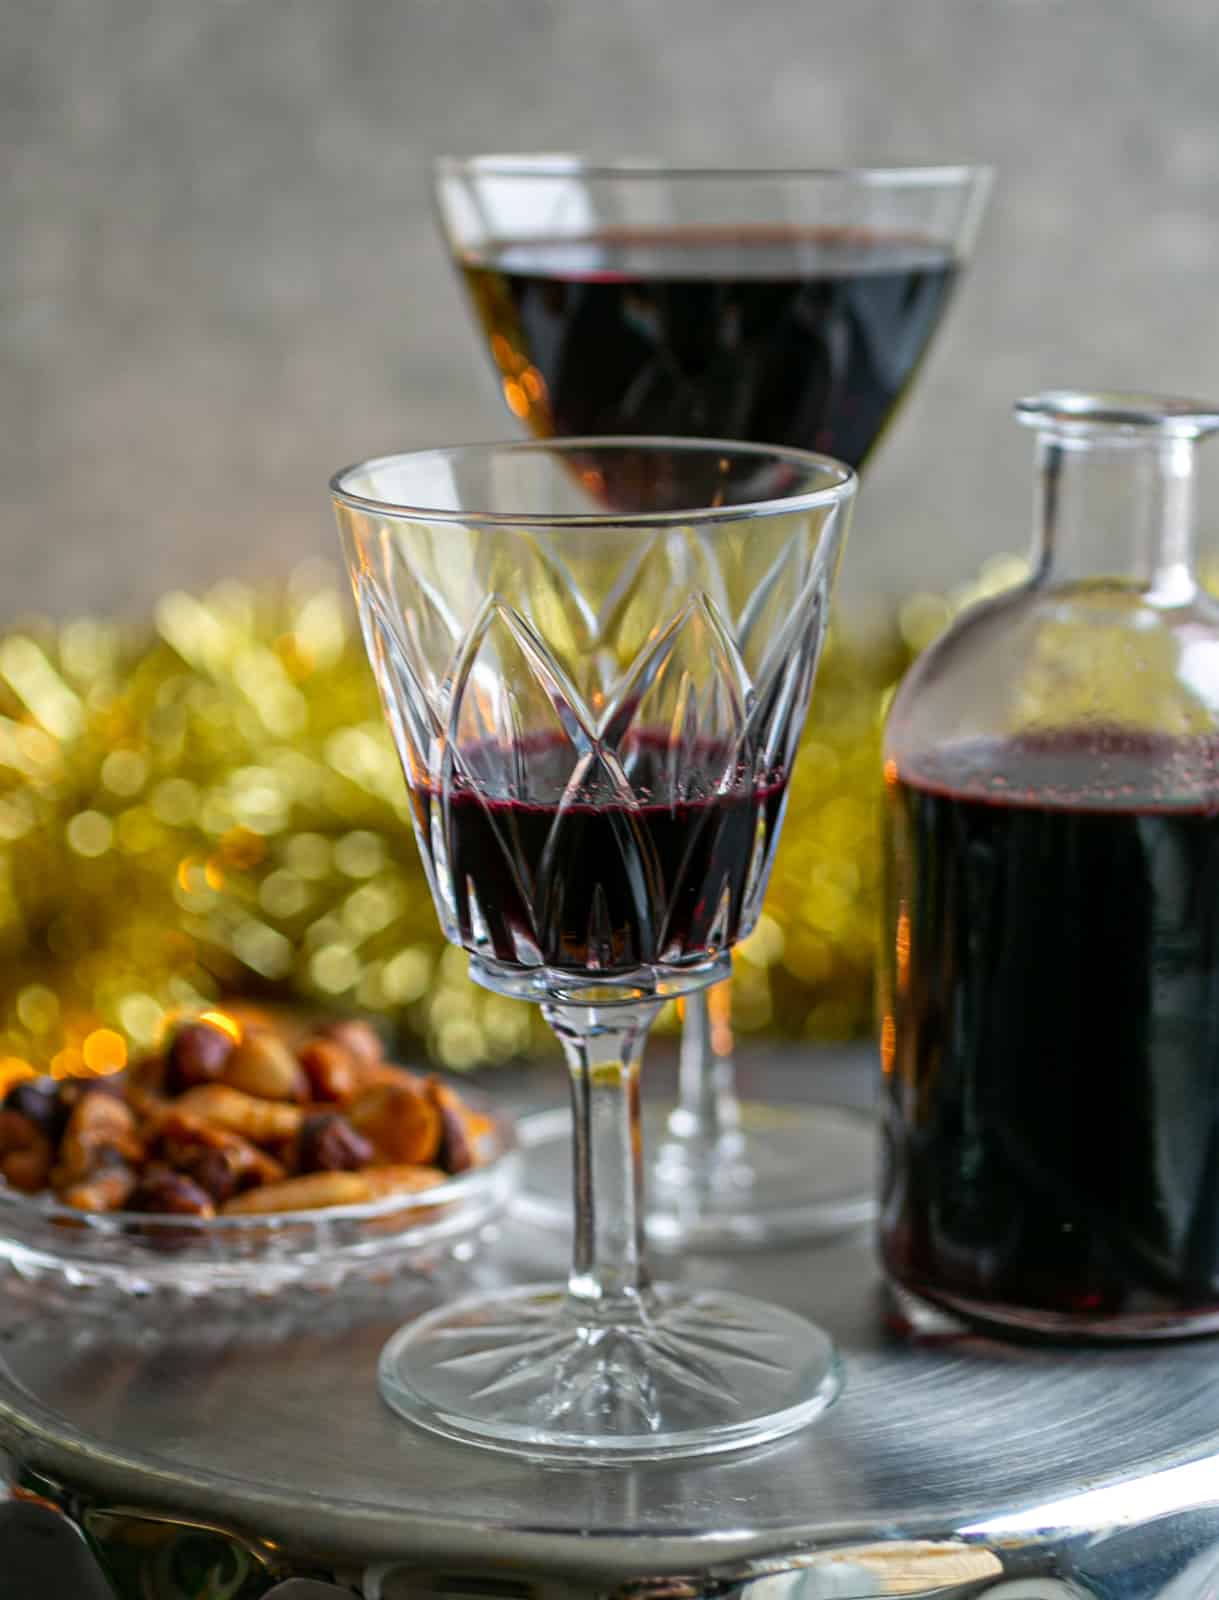 Christmas tinsel and lights surrounding a silver platter of glasses filled with mulled wine